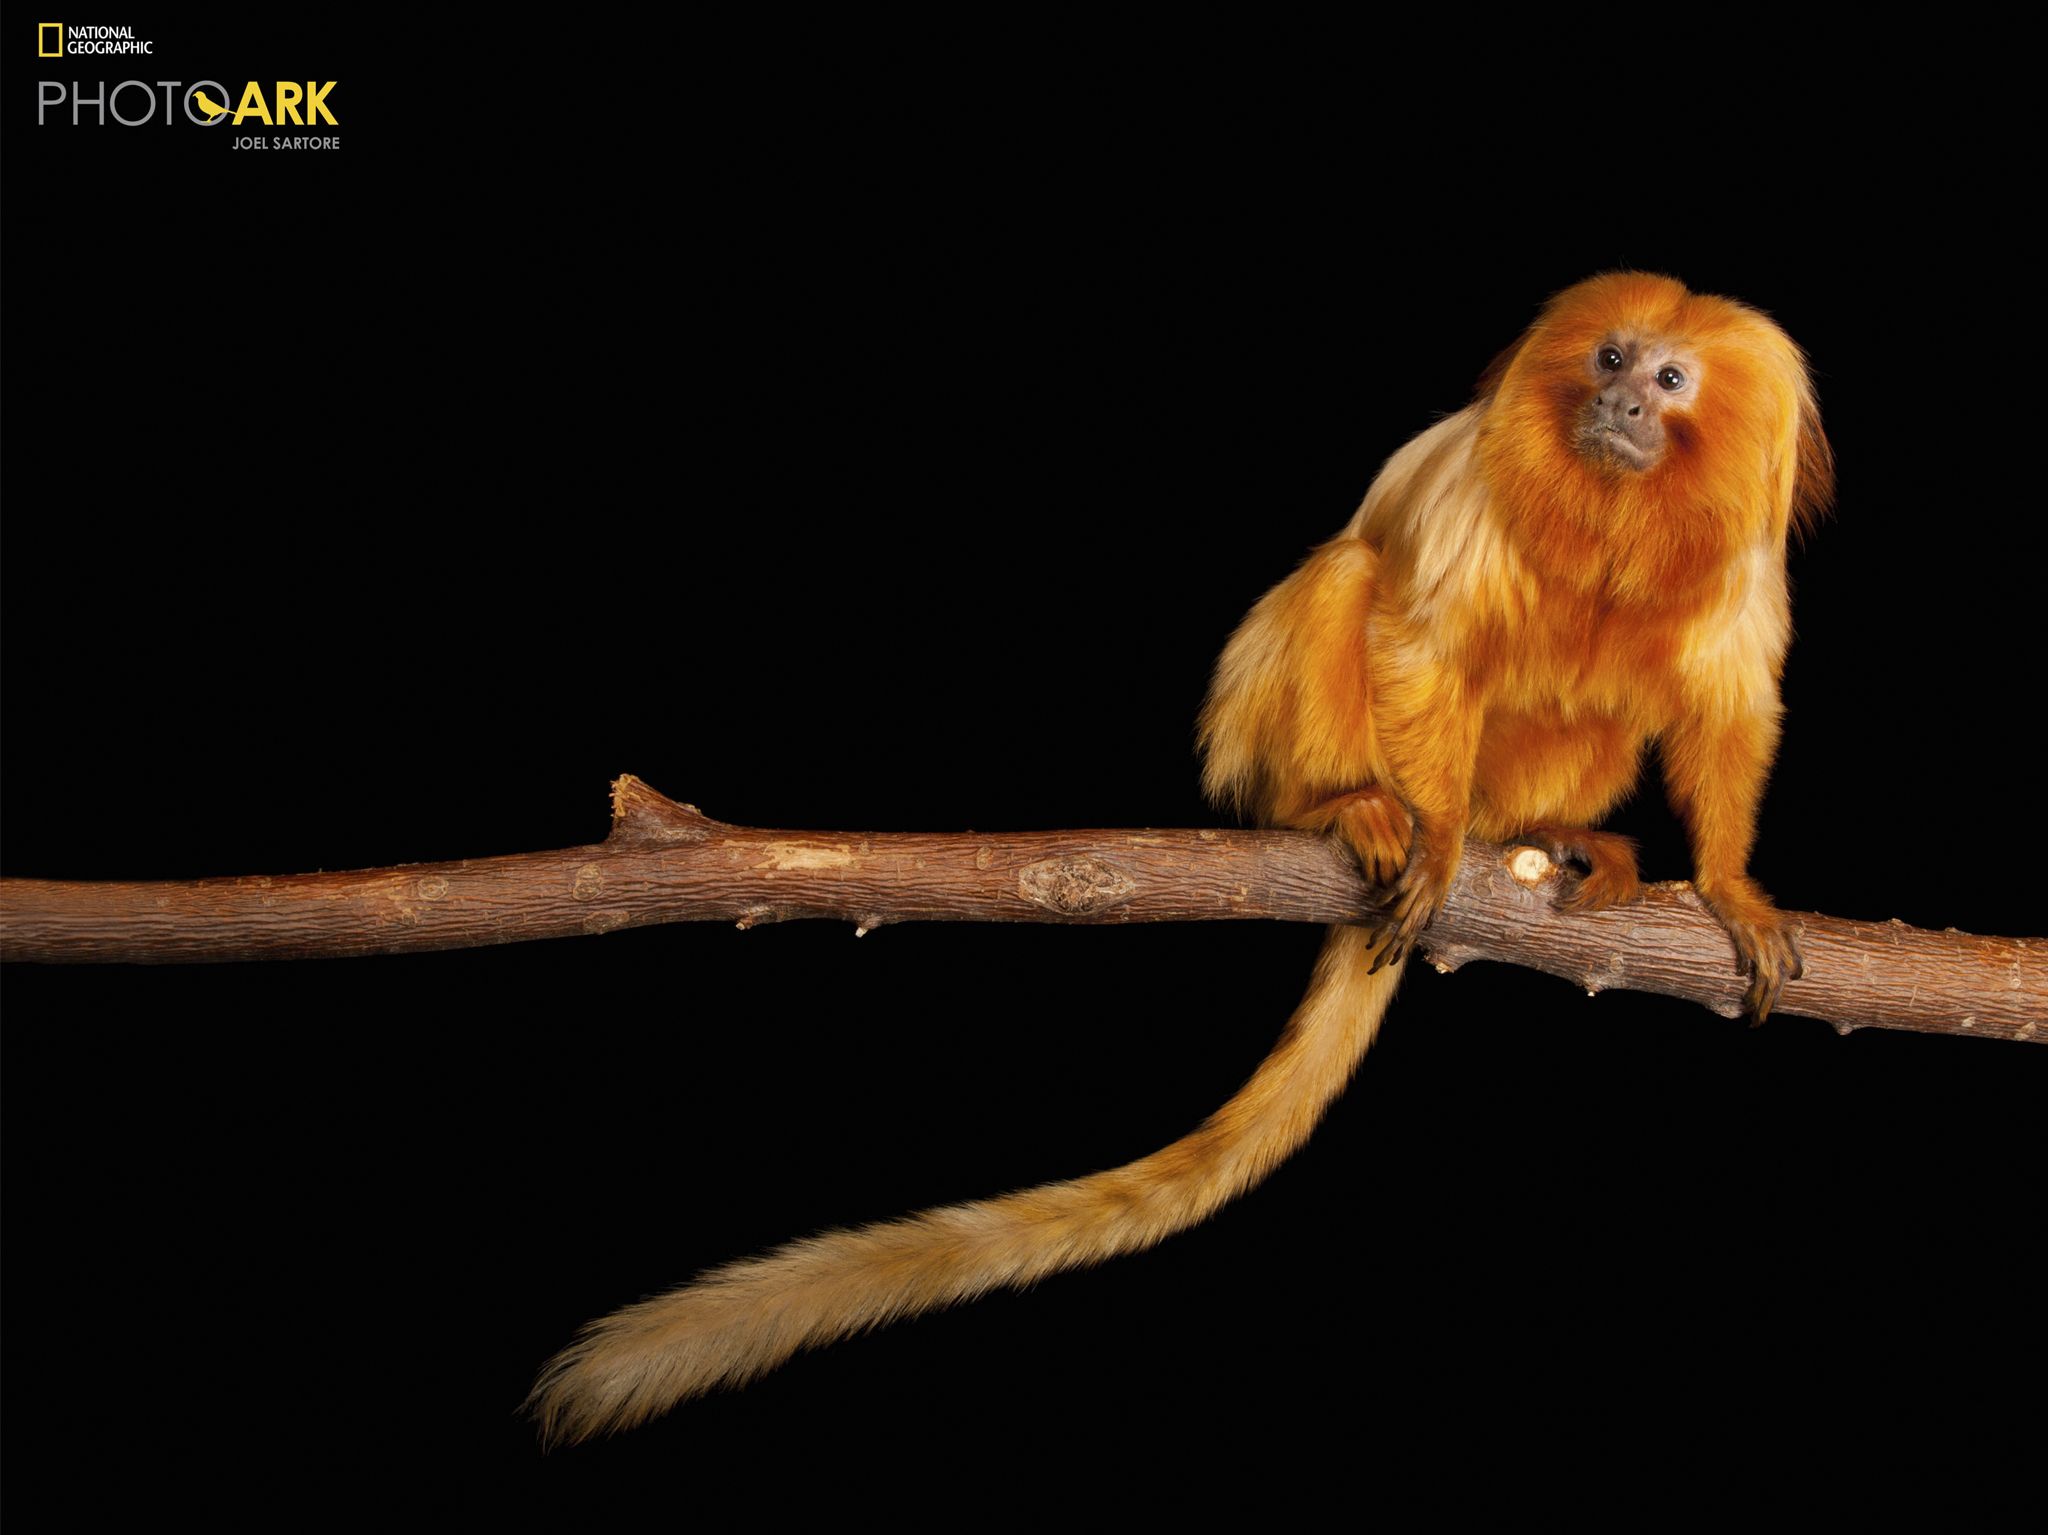 An endangered Golden lion tamarin, Leontopithecus rosalia, at the Lincoln Children's Zoo. This... [Photo of the day - November 2020]